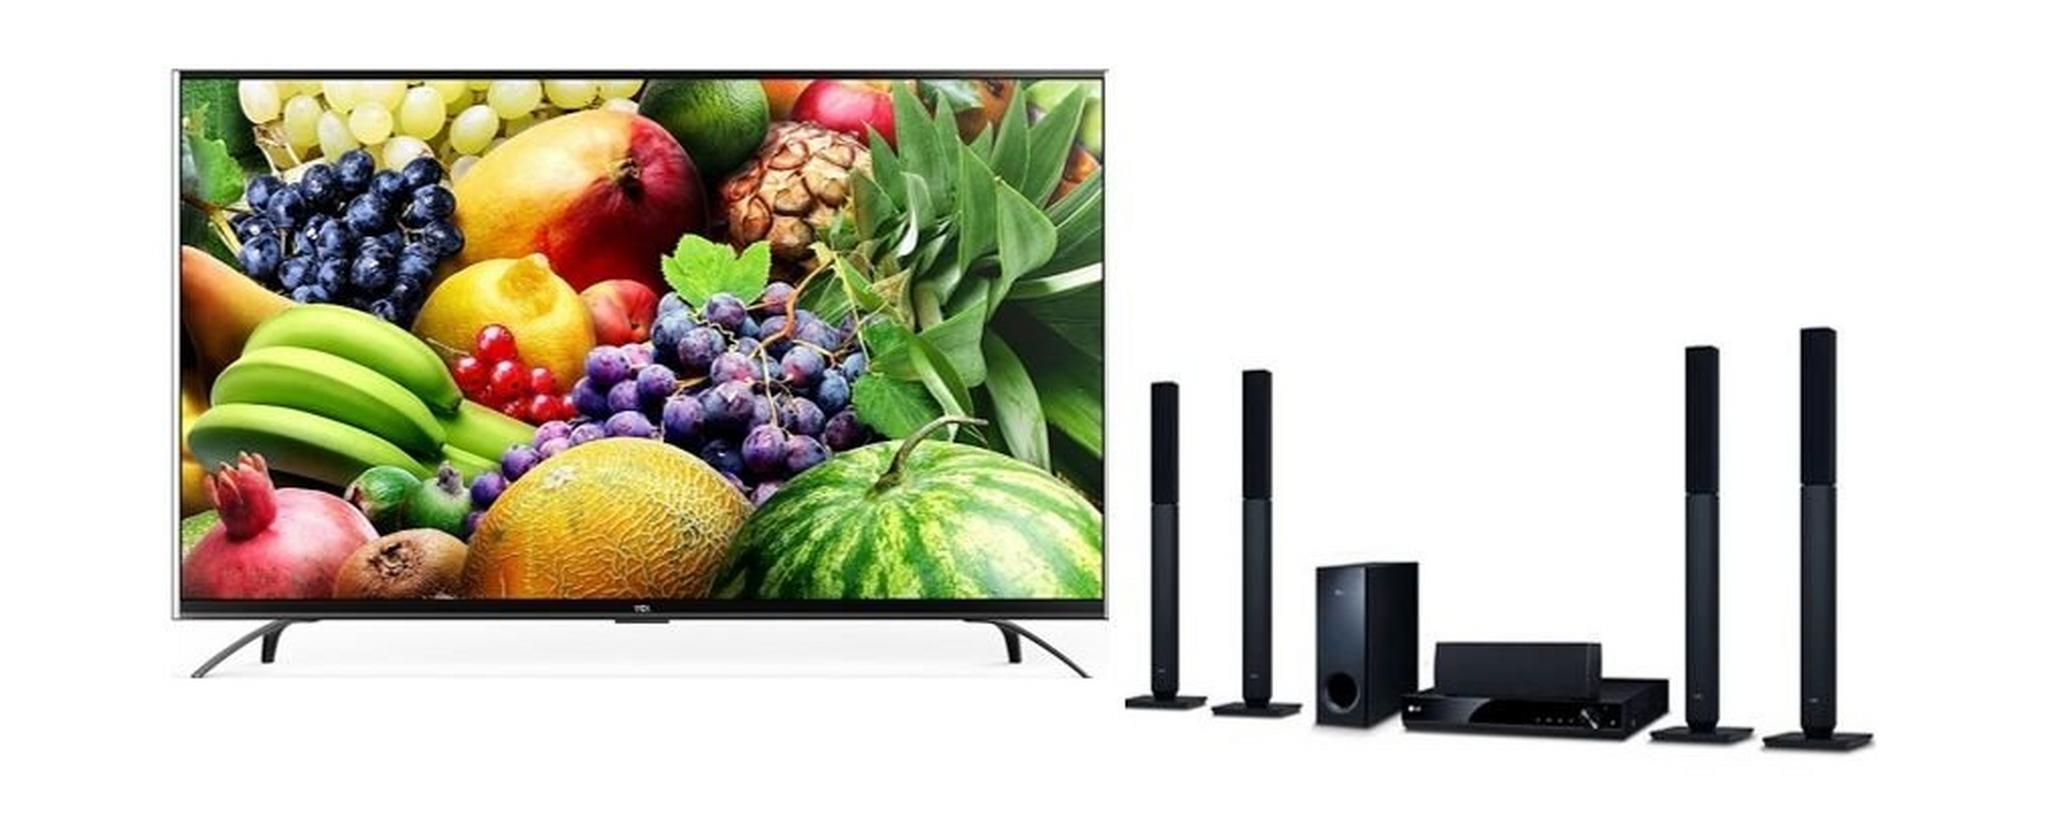 TCL 50-inch Ultra HD (2160p) Smart LED TV + LG 330W 5.1 Channel DVD Home Theater System